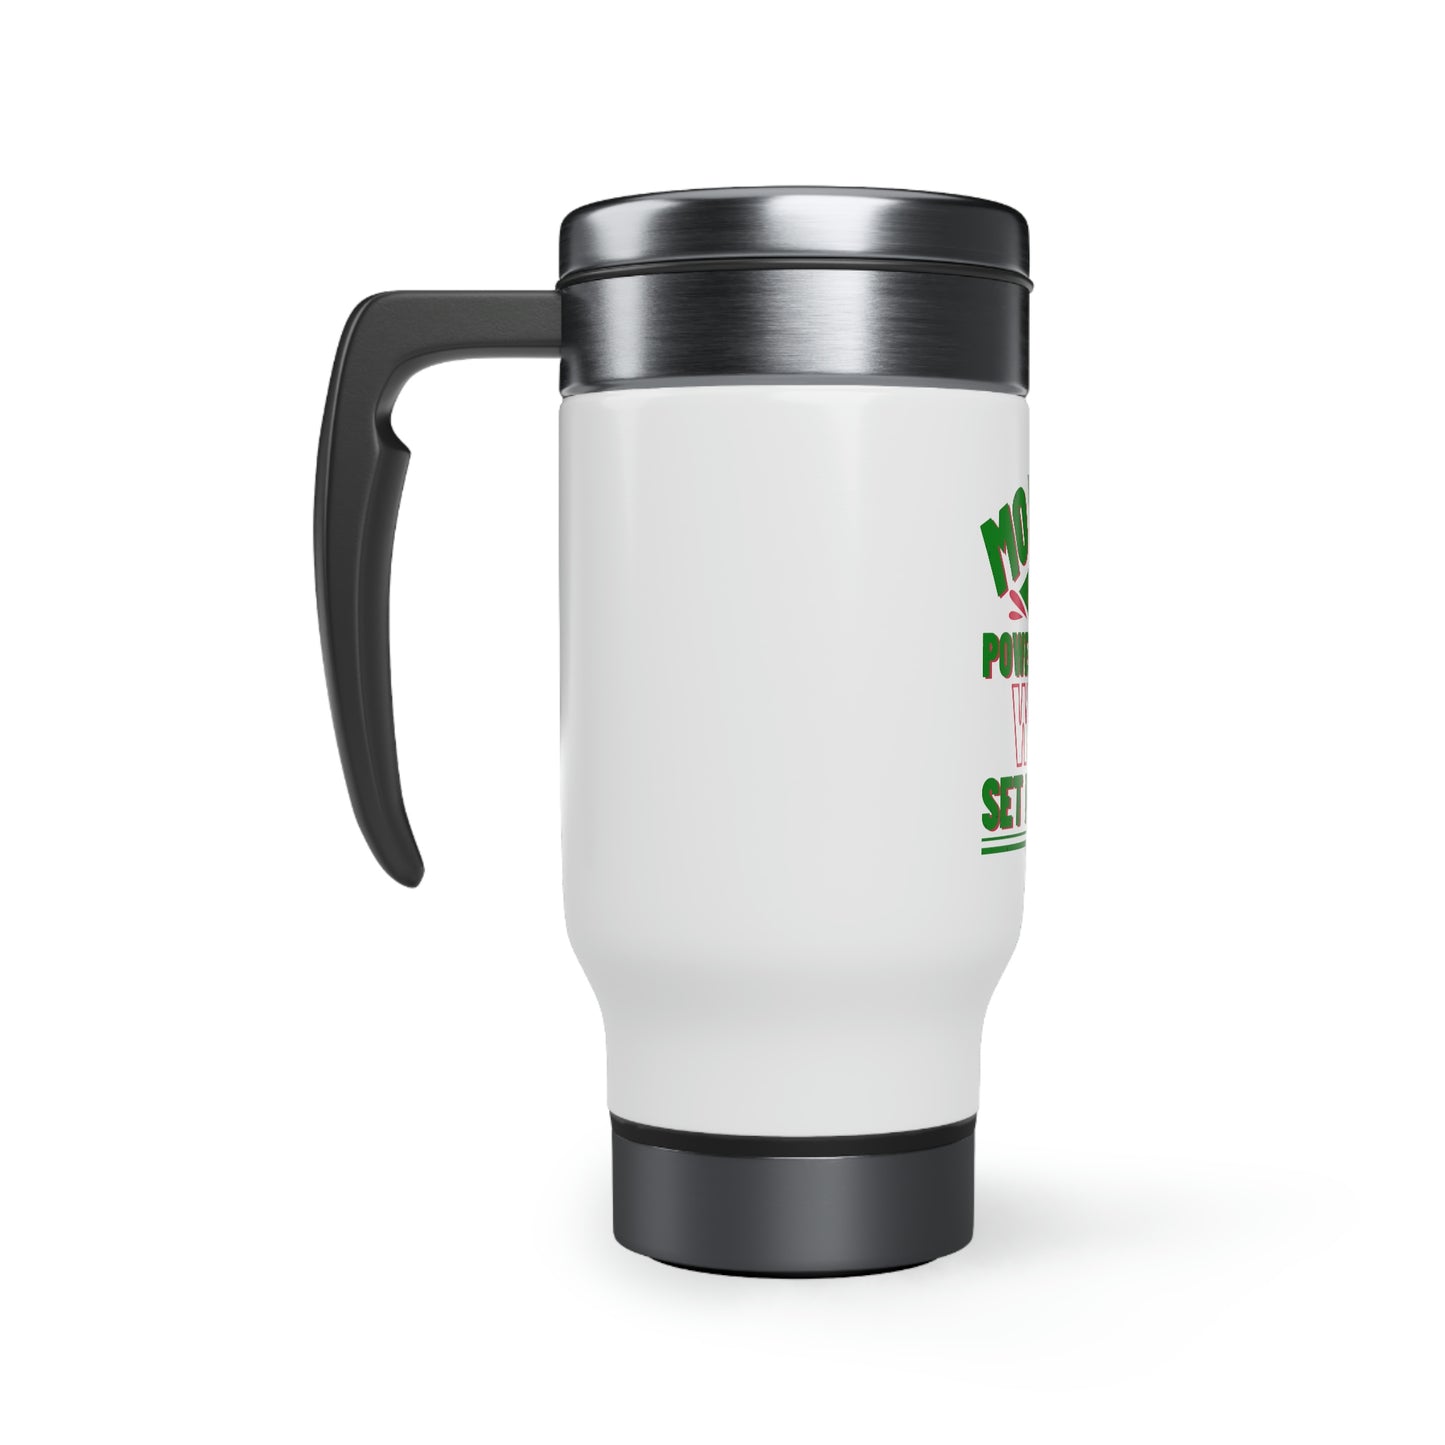 Moving In The Power Of God Who Set Me Free Travel Mug with Handle, 14oz